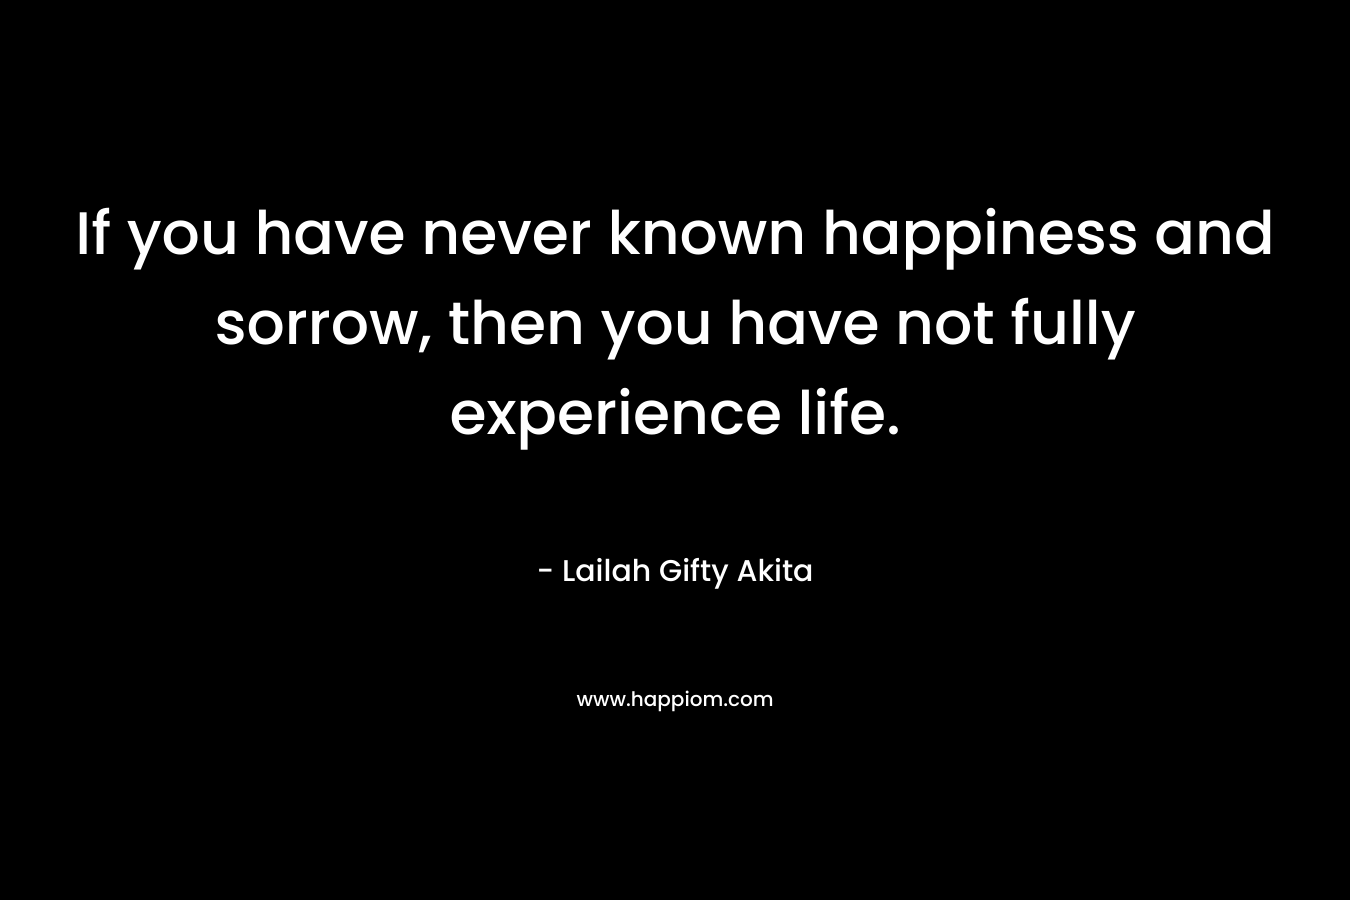 If you have never known happiness and sorrow, then you have not fully experience life.